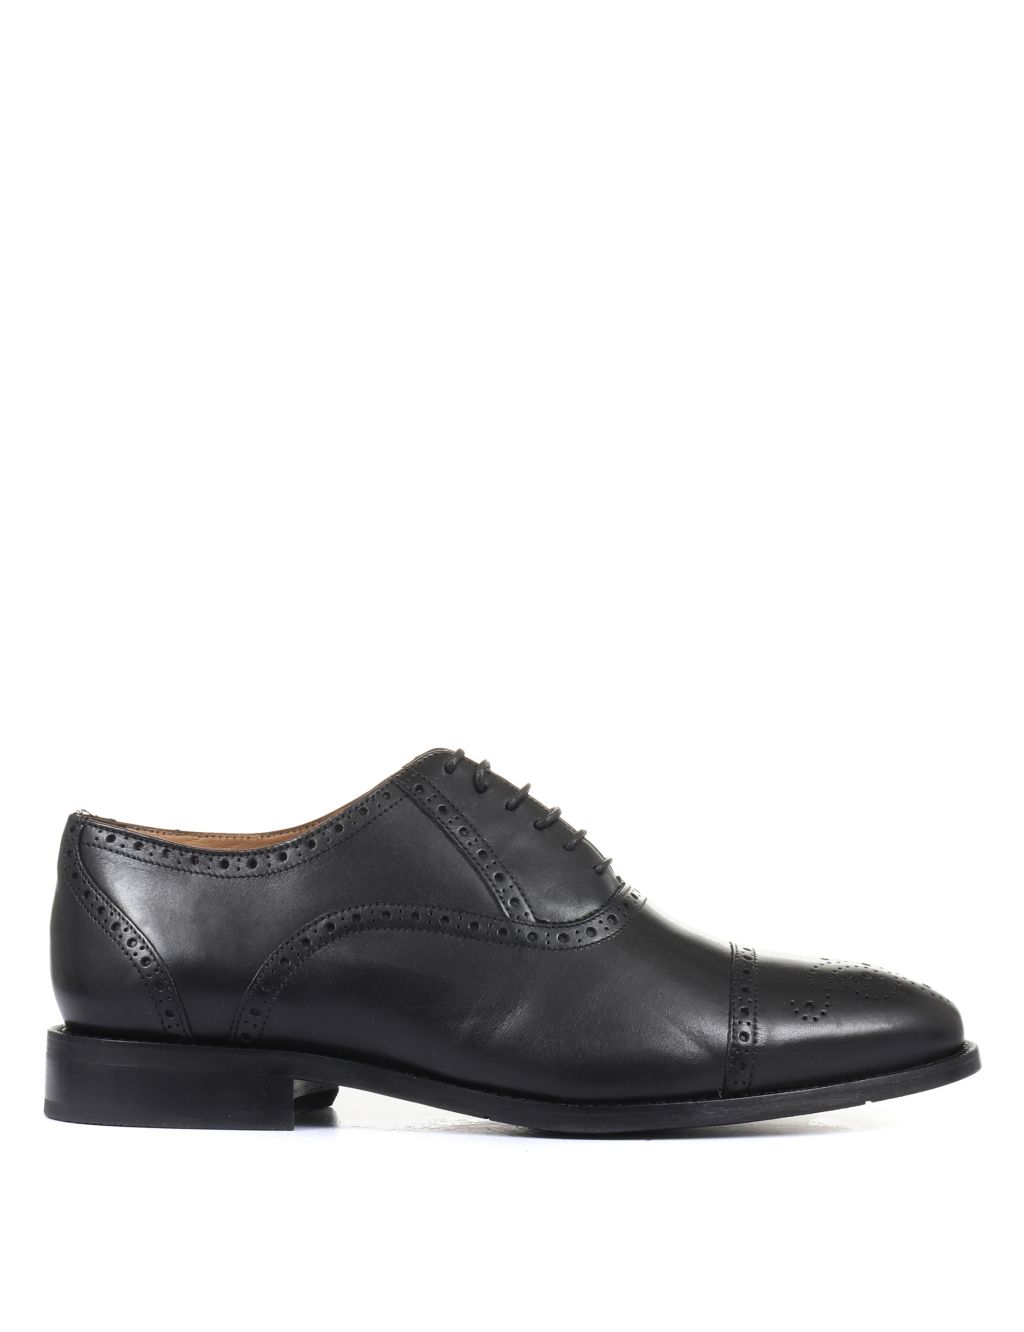 Wide Fit Leather Oxford Shoes image 5